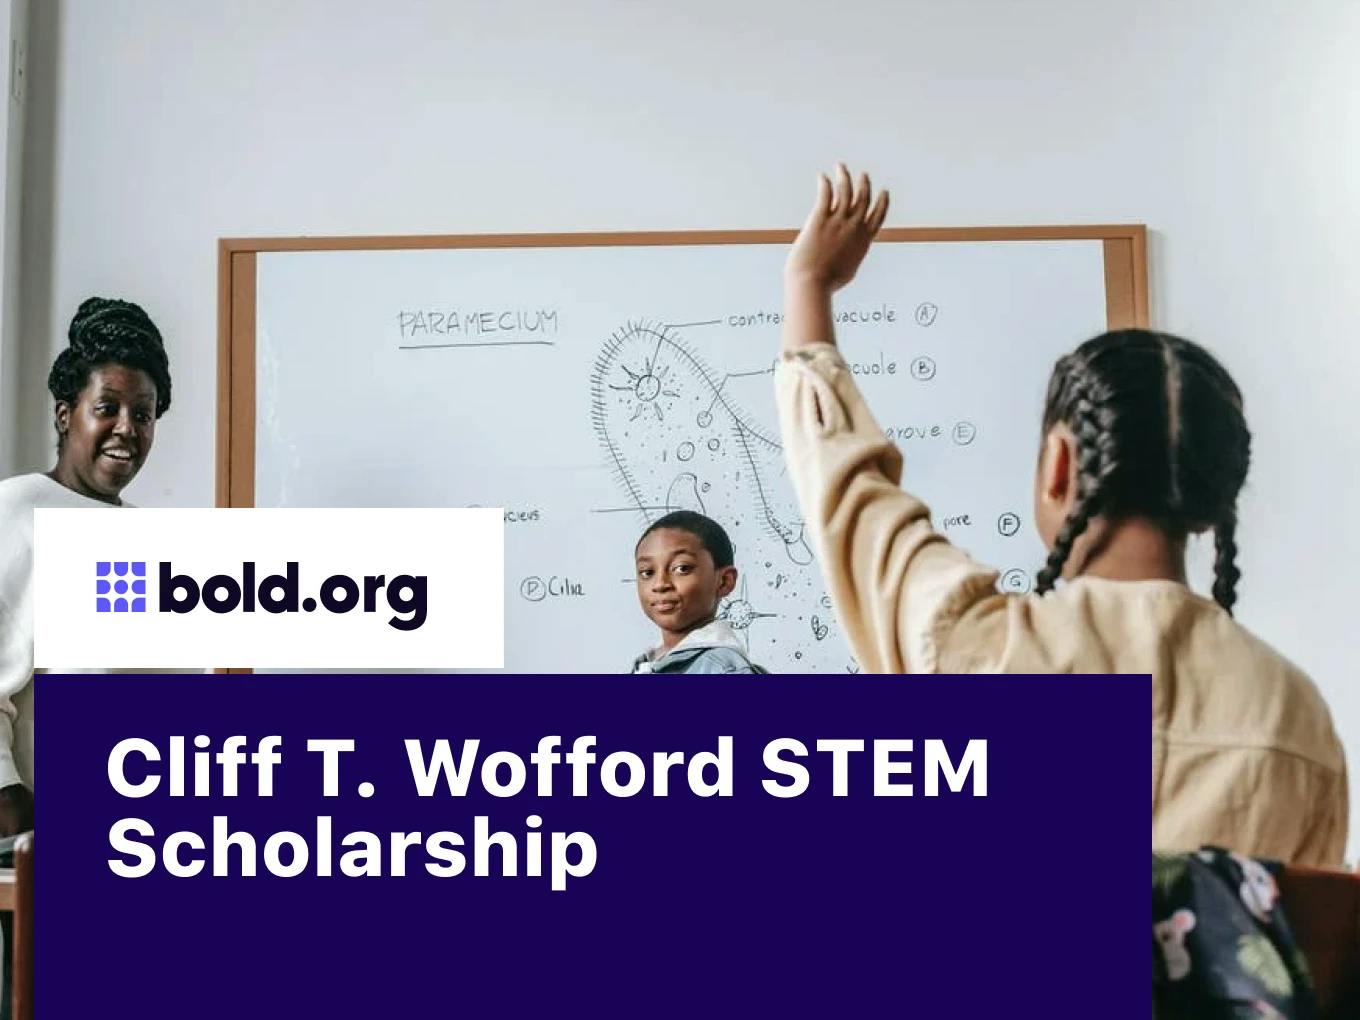 Cliff T. Wofford STEM Scholarship